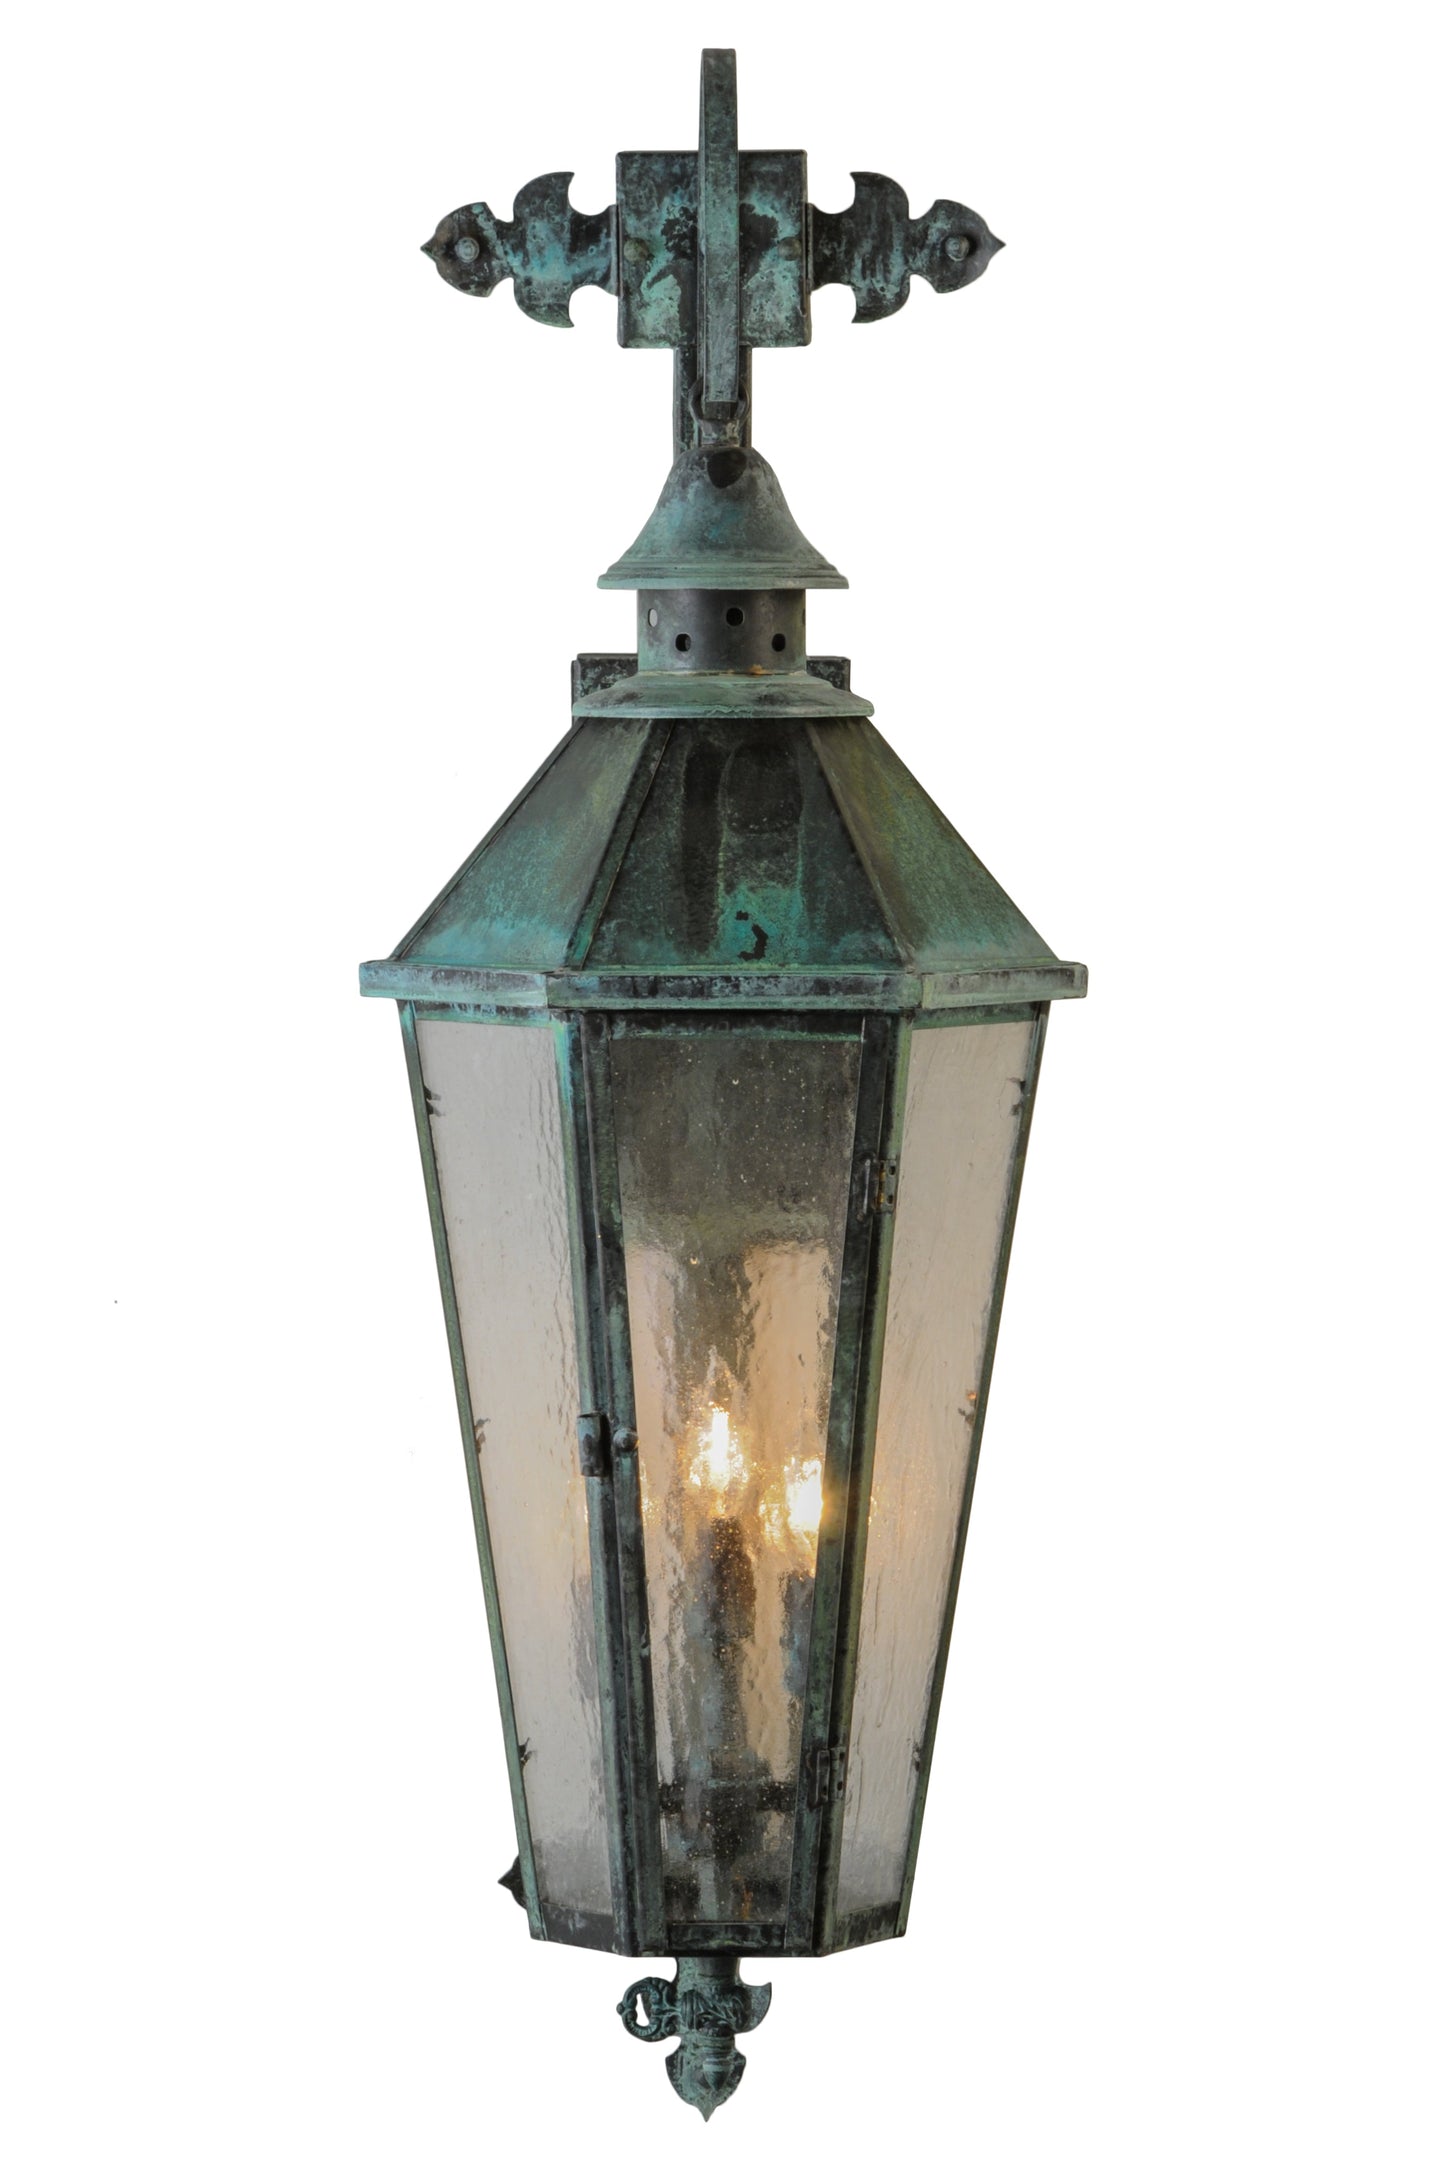 11" Millesime Lantern Wall Sconce by 2nd Ave Lighting